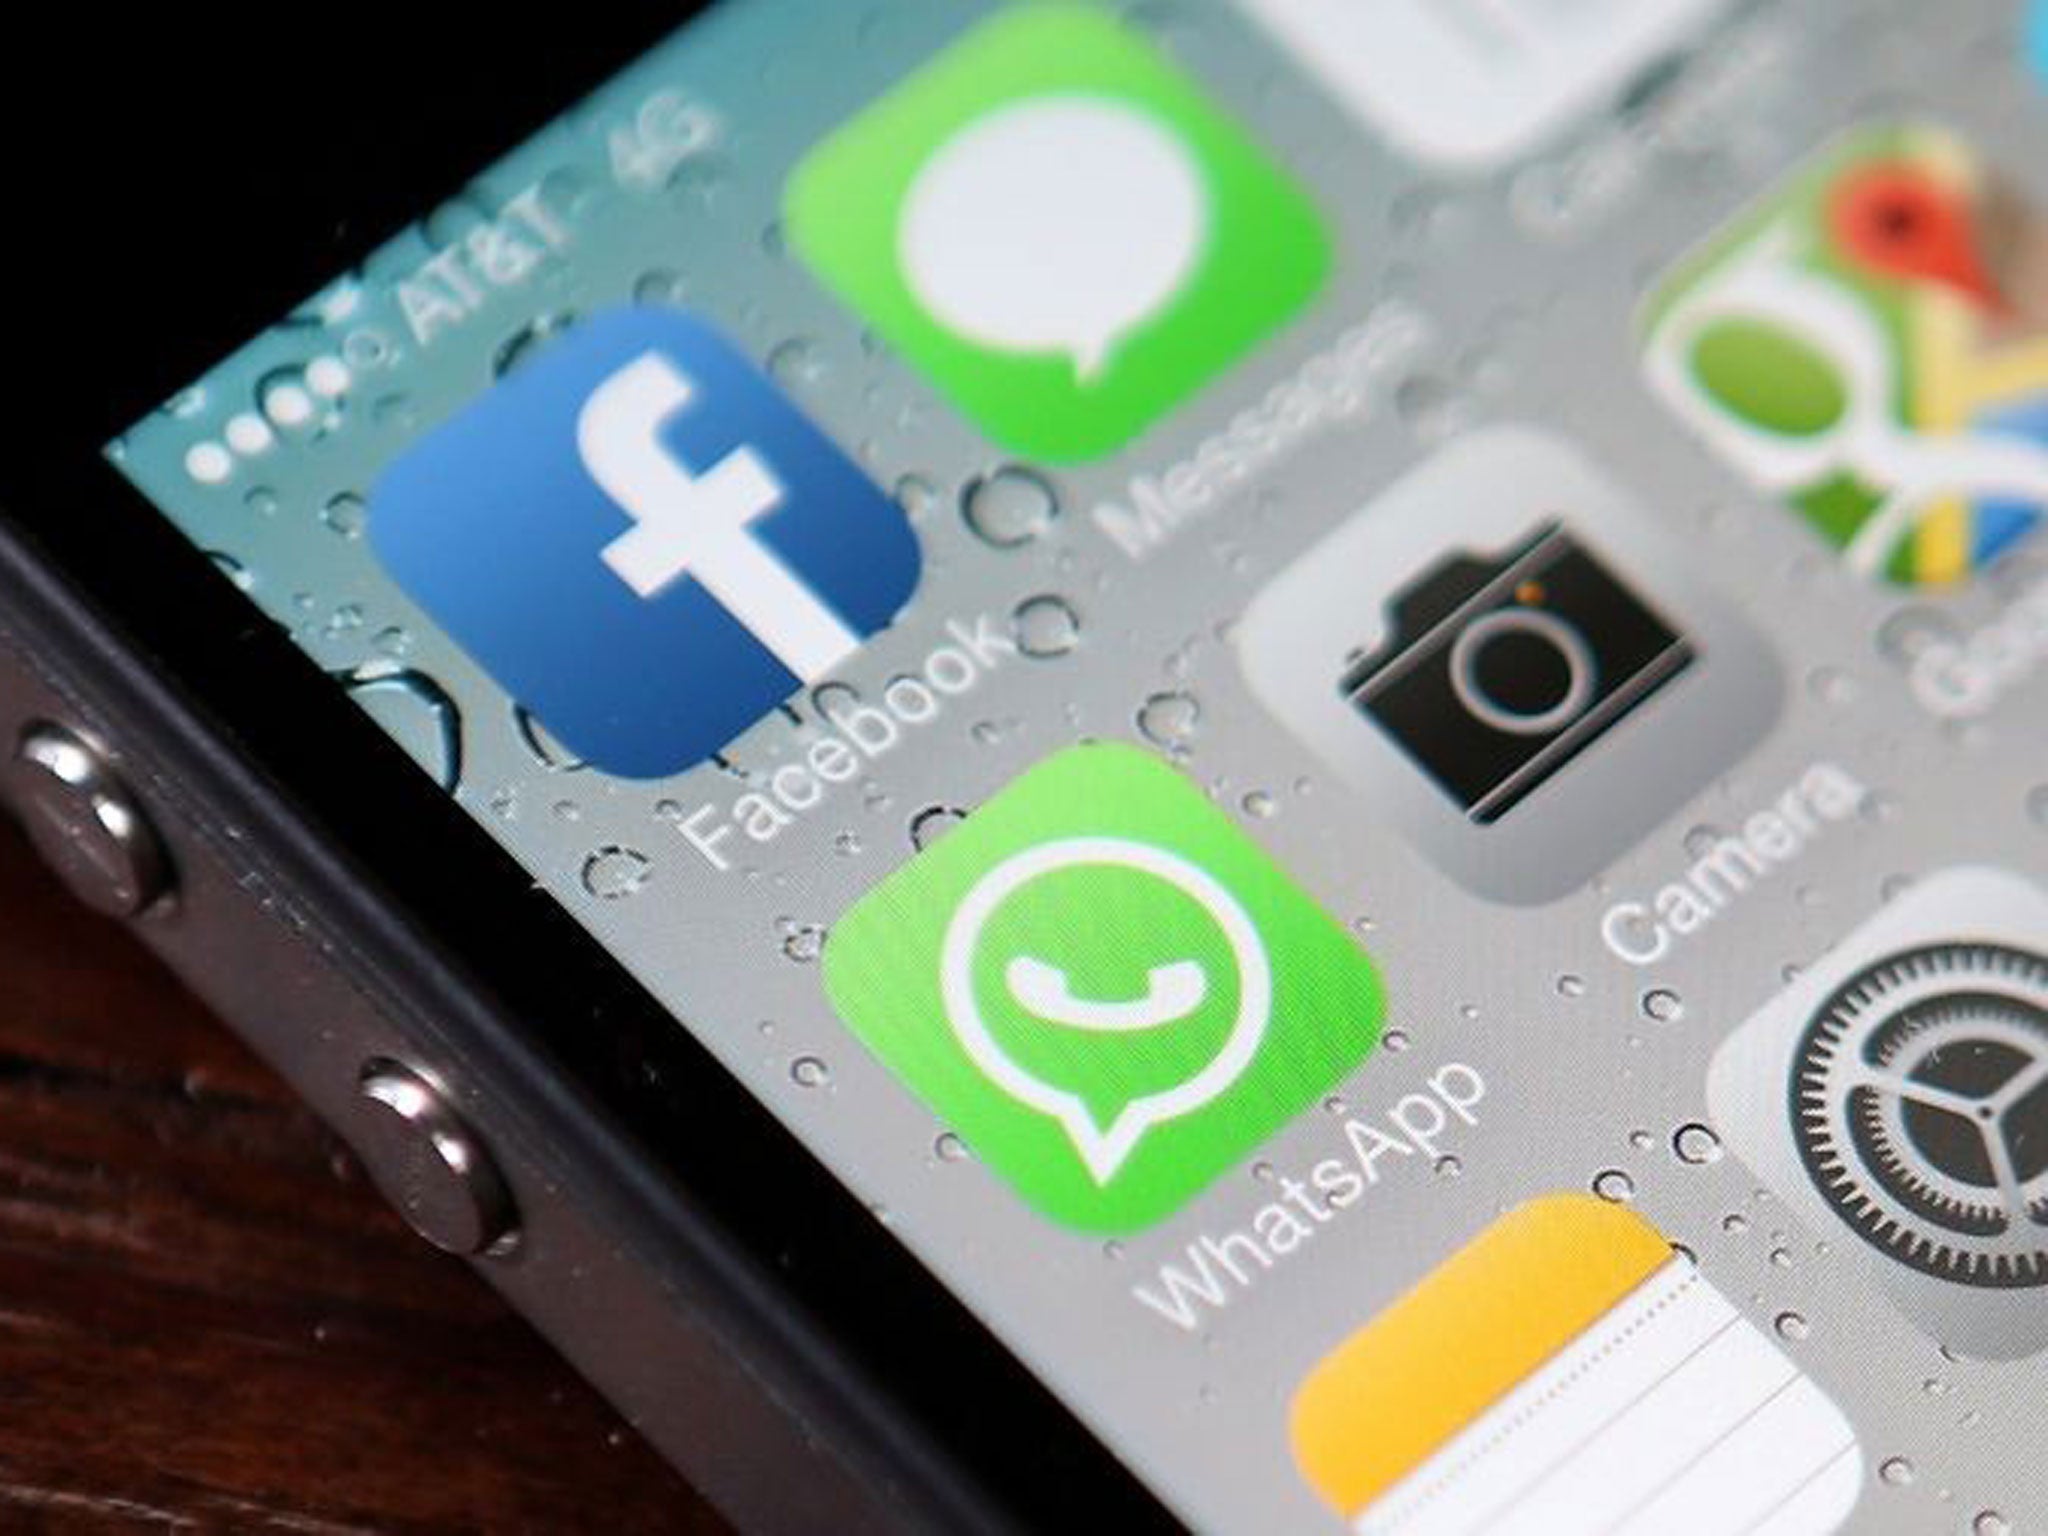 Who's going to be next? WhatsApp's success is being replicated across the tech industry as Apps are hungrily bought up